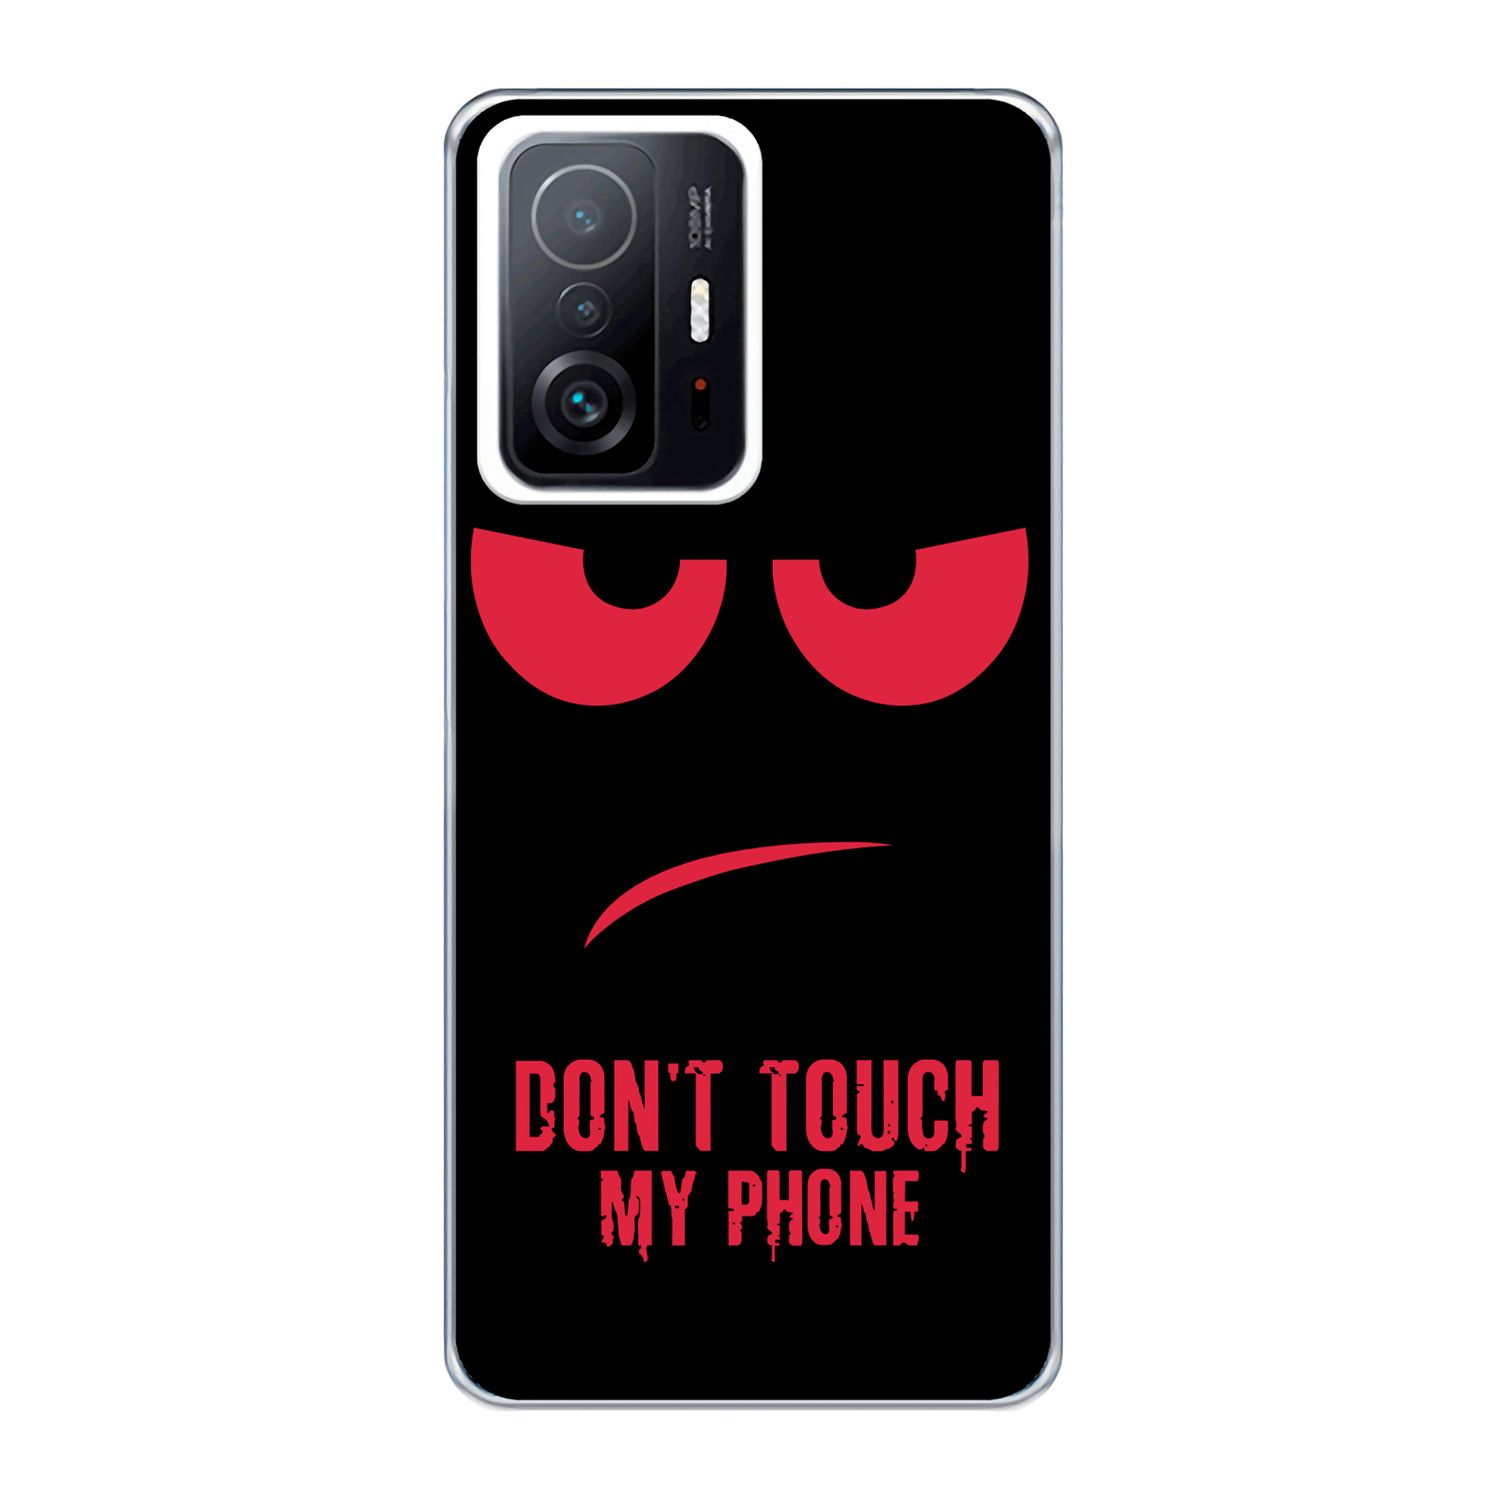 KÖNIG DESIGN My 11T Case, Backcover, Xiaomi, Touch 11T Dont Rot Mi / Phone Pro